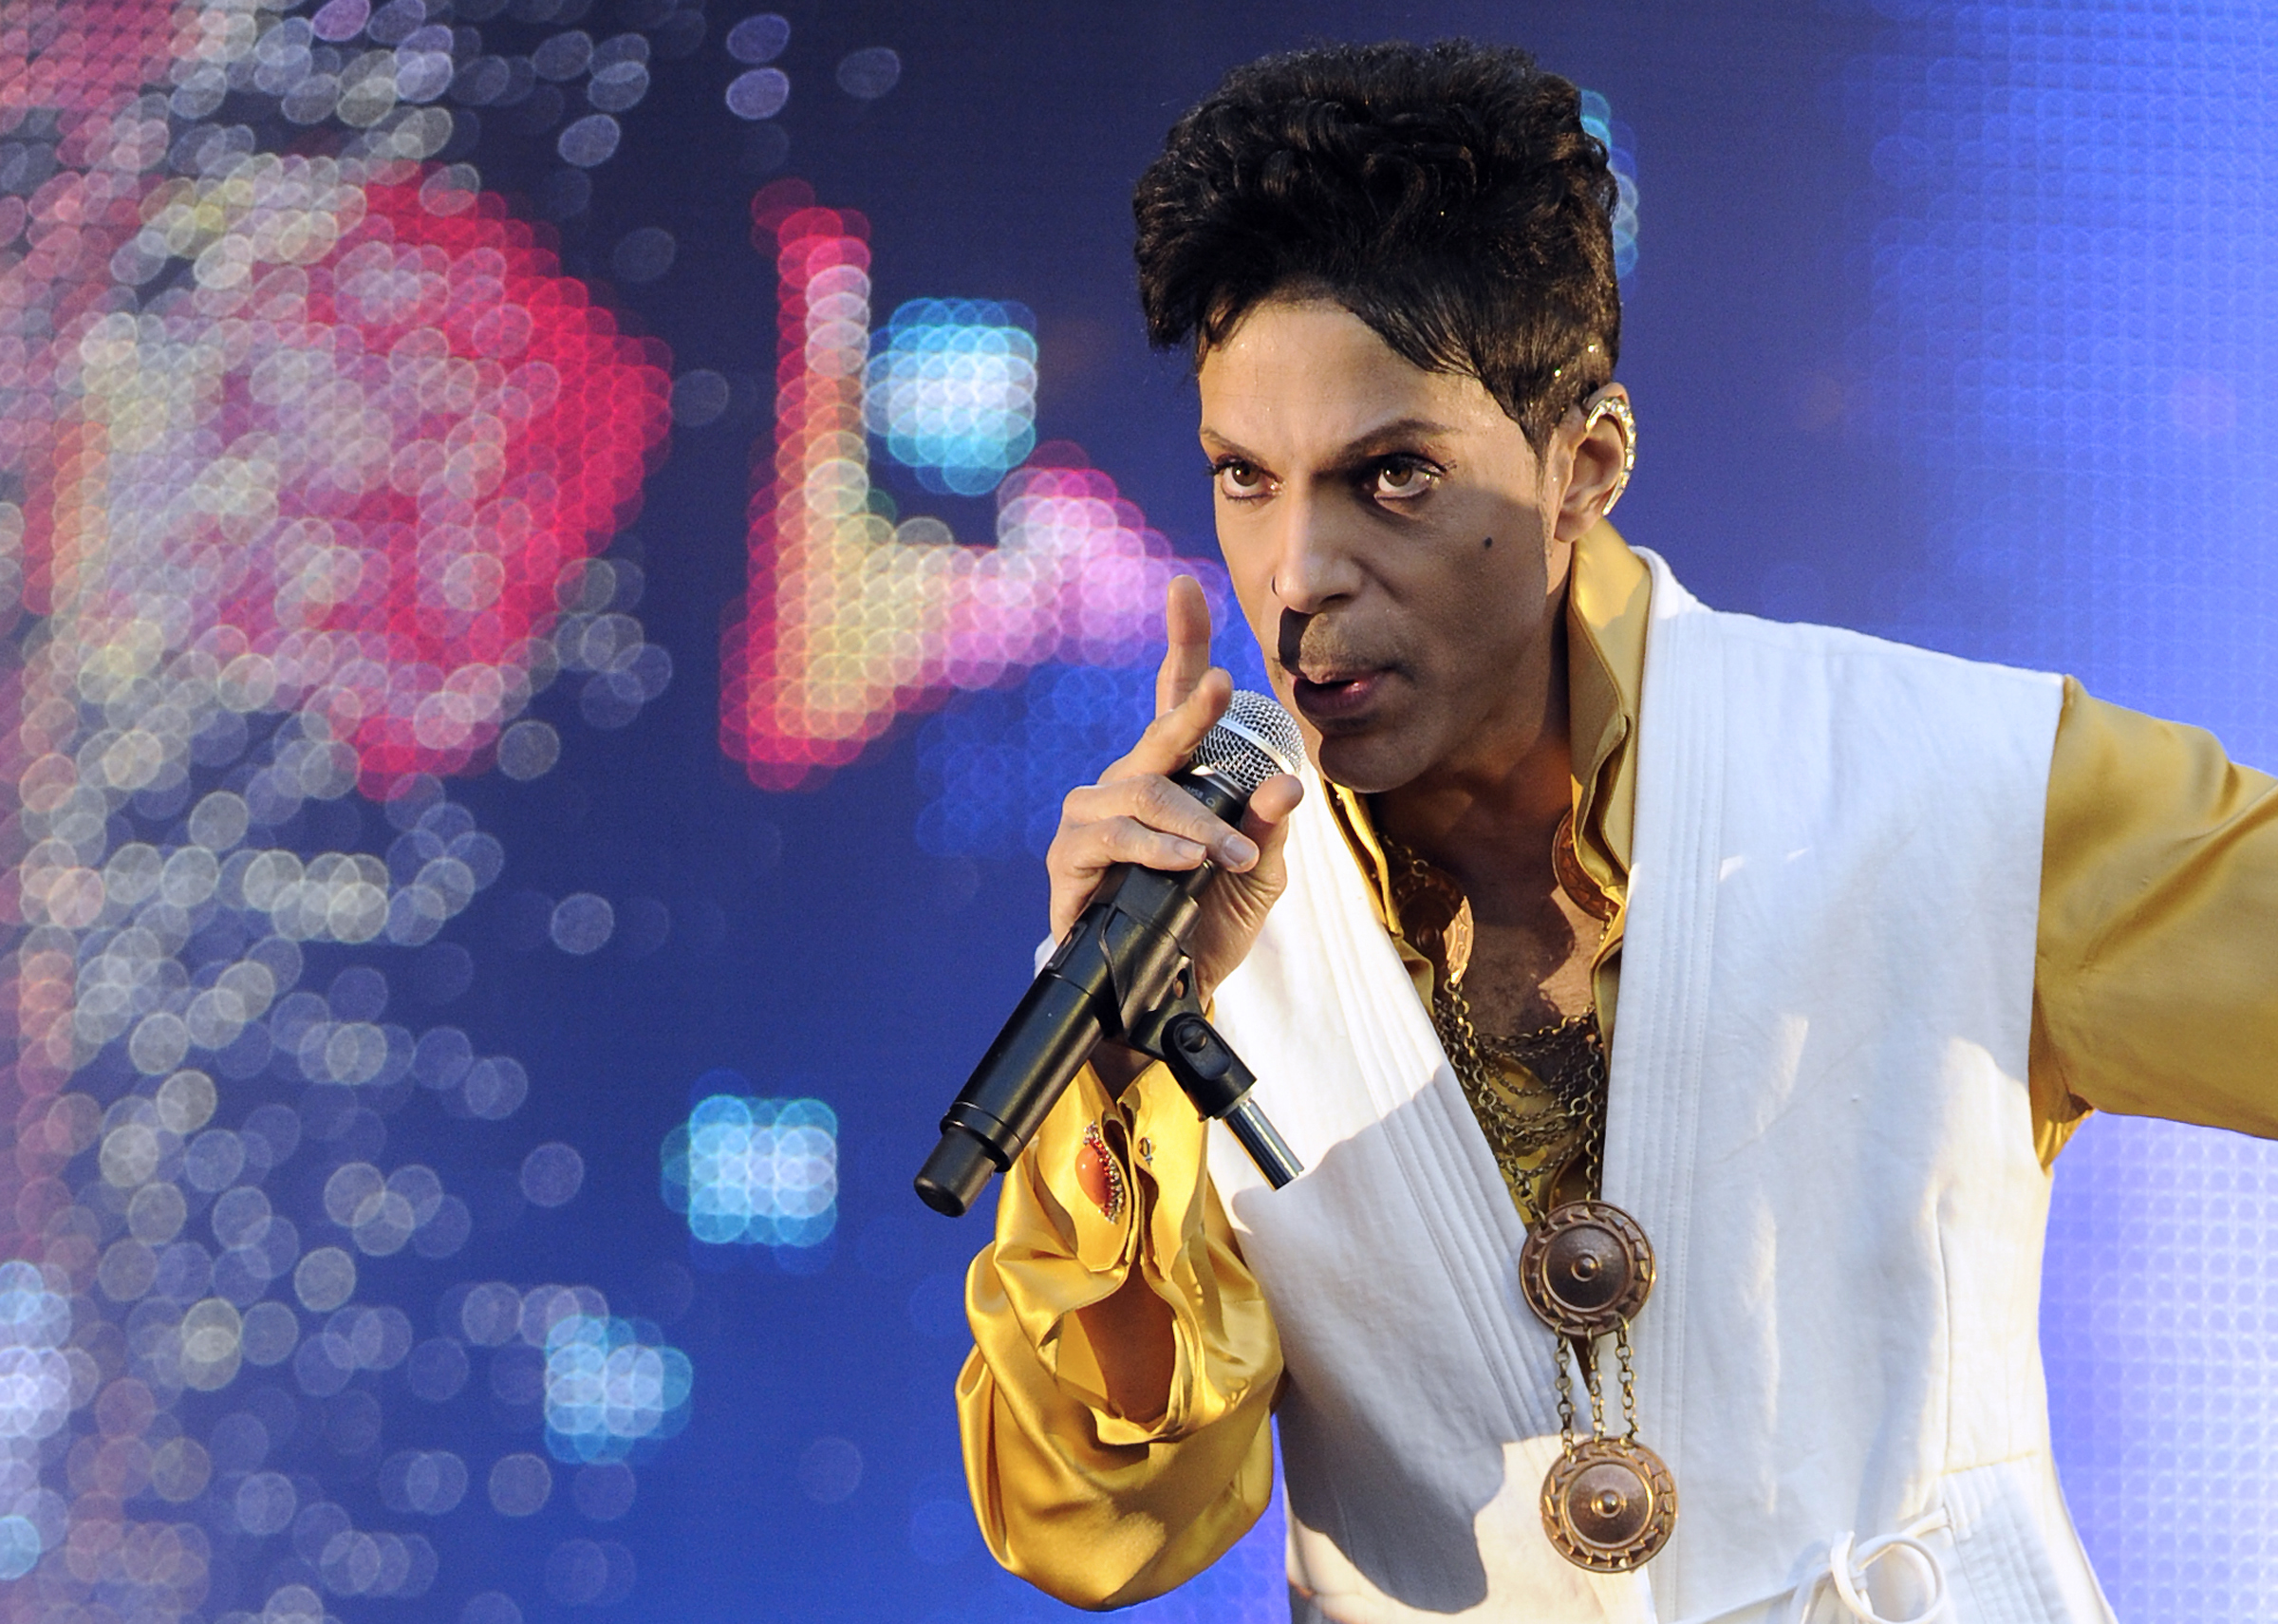 US singer and musician Prince (born Prince Rogers Nelson) performs on stage at the Stade de France in Saint-Denis, outside Paris, on June 30, 2011. (Bertrand Guay&mdash;AFP/Getty Images)